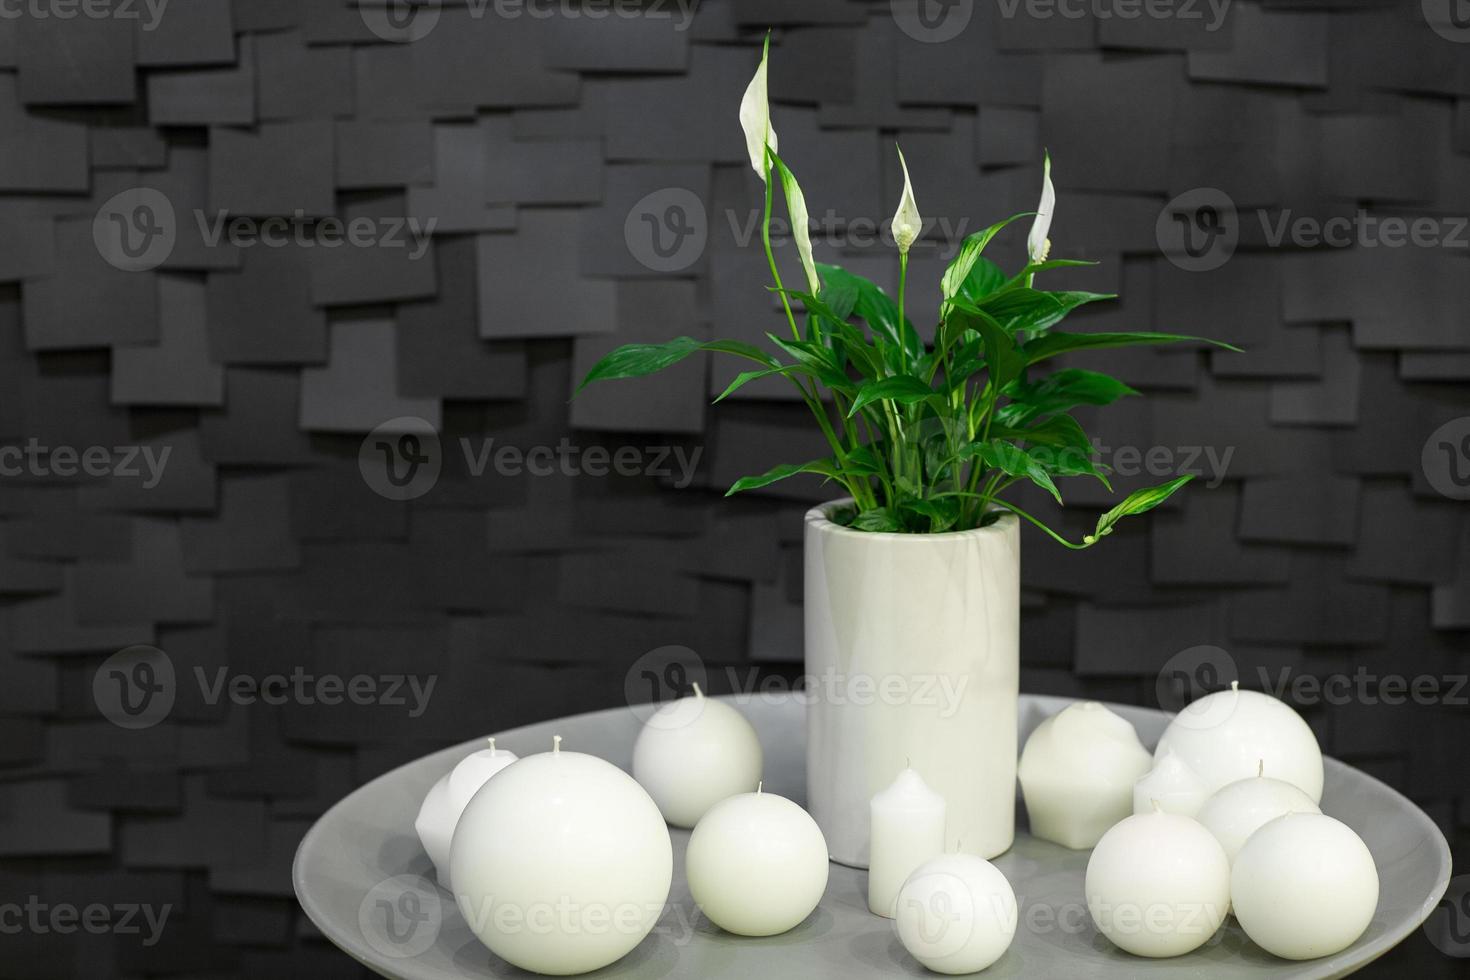 decoration of globular candle and a vase with a flower on a white plate on a dark background with tiles photo